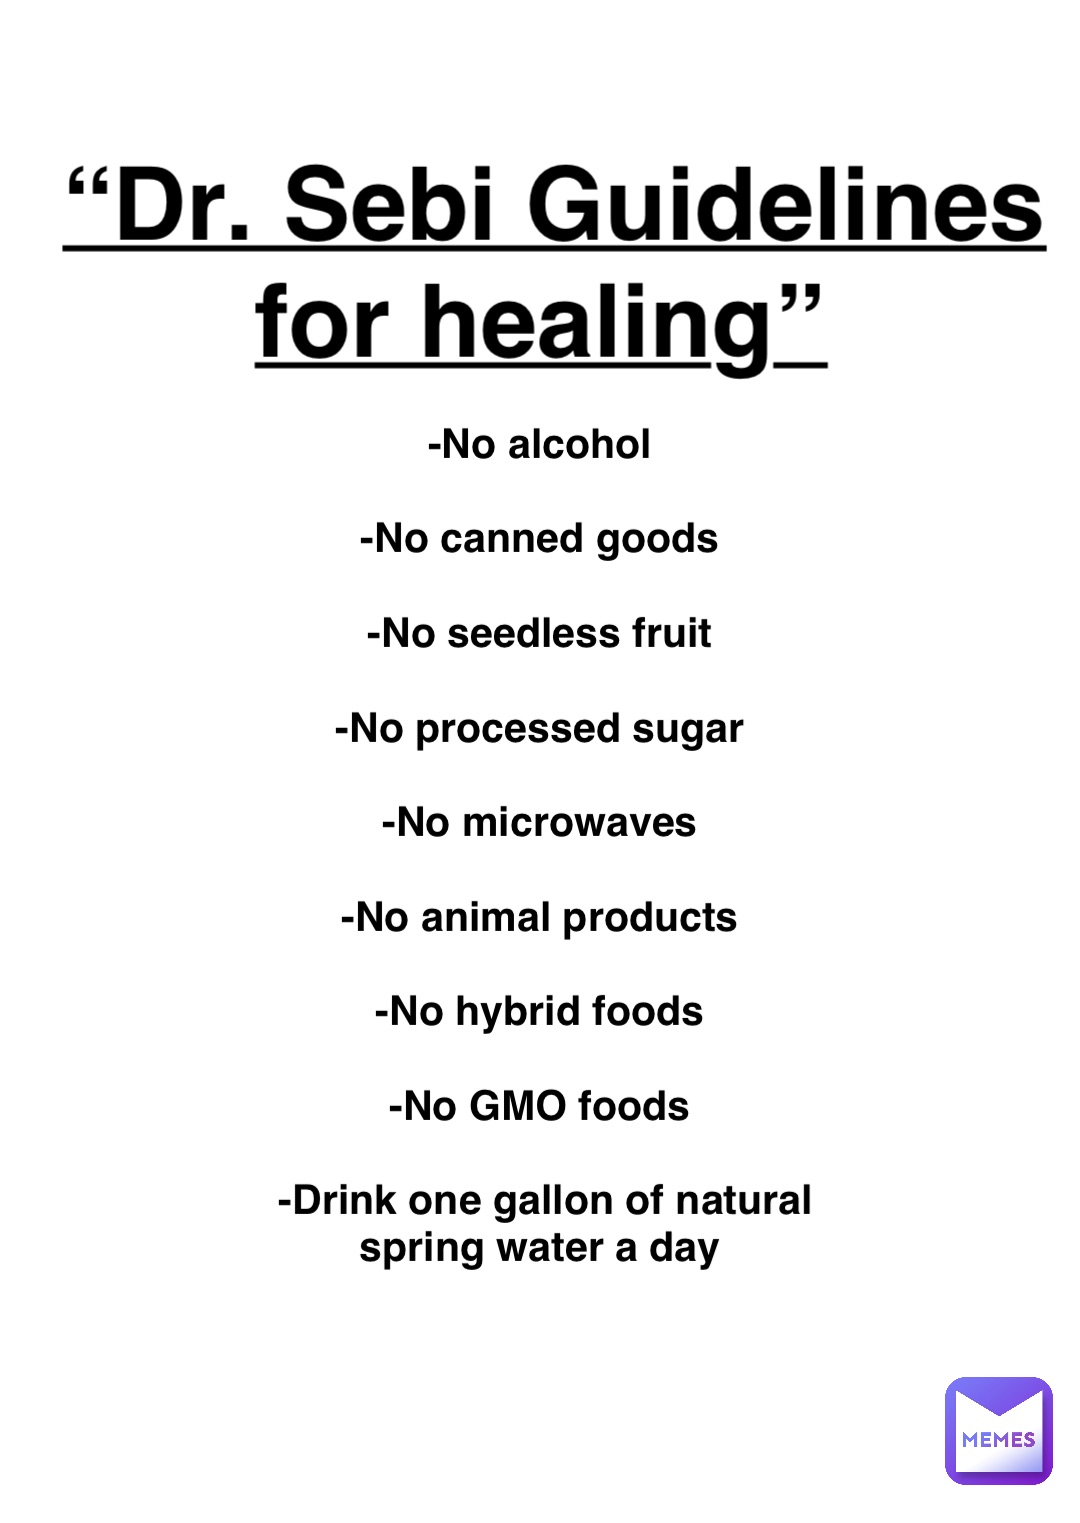 Double tap to edit “Dr. Sebi Guidelines for healing” -No alcohol

-No canned goods

-No seedless fruit

-No processed sugar

-No microwaves

-No animal products

-No hybrid foods

-No GMO foods

-Drink one gallon of natural spring water a day